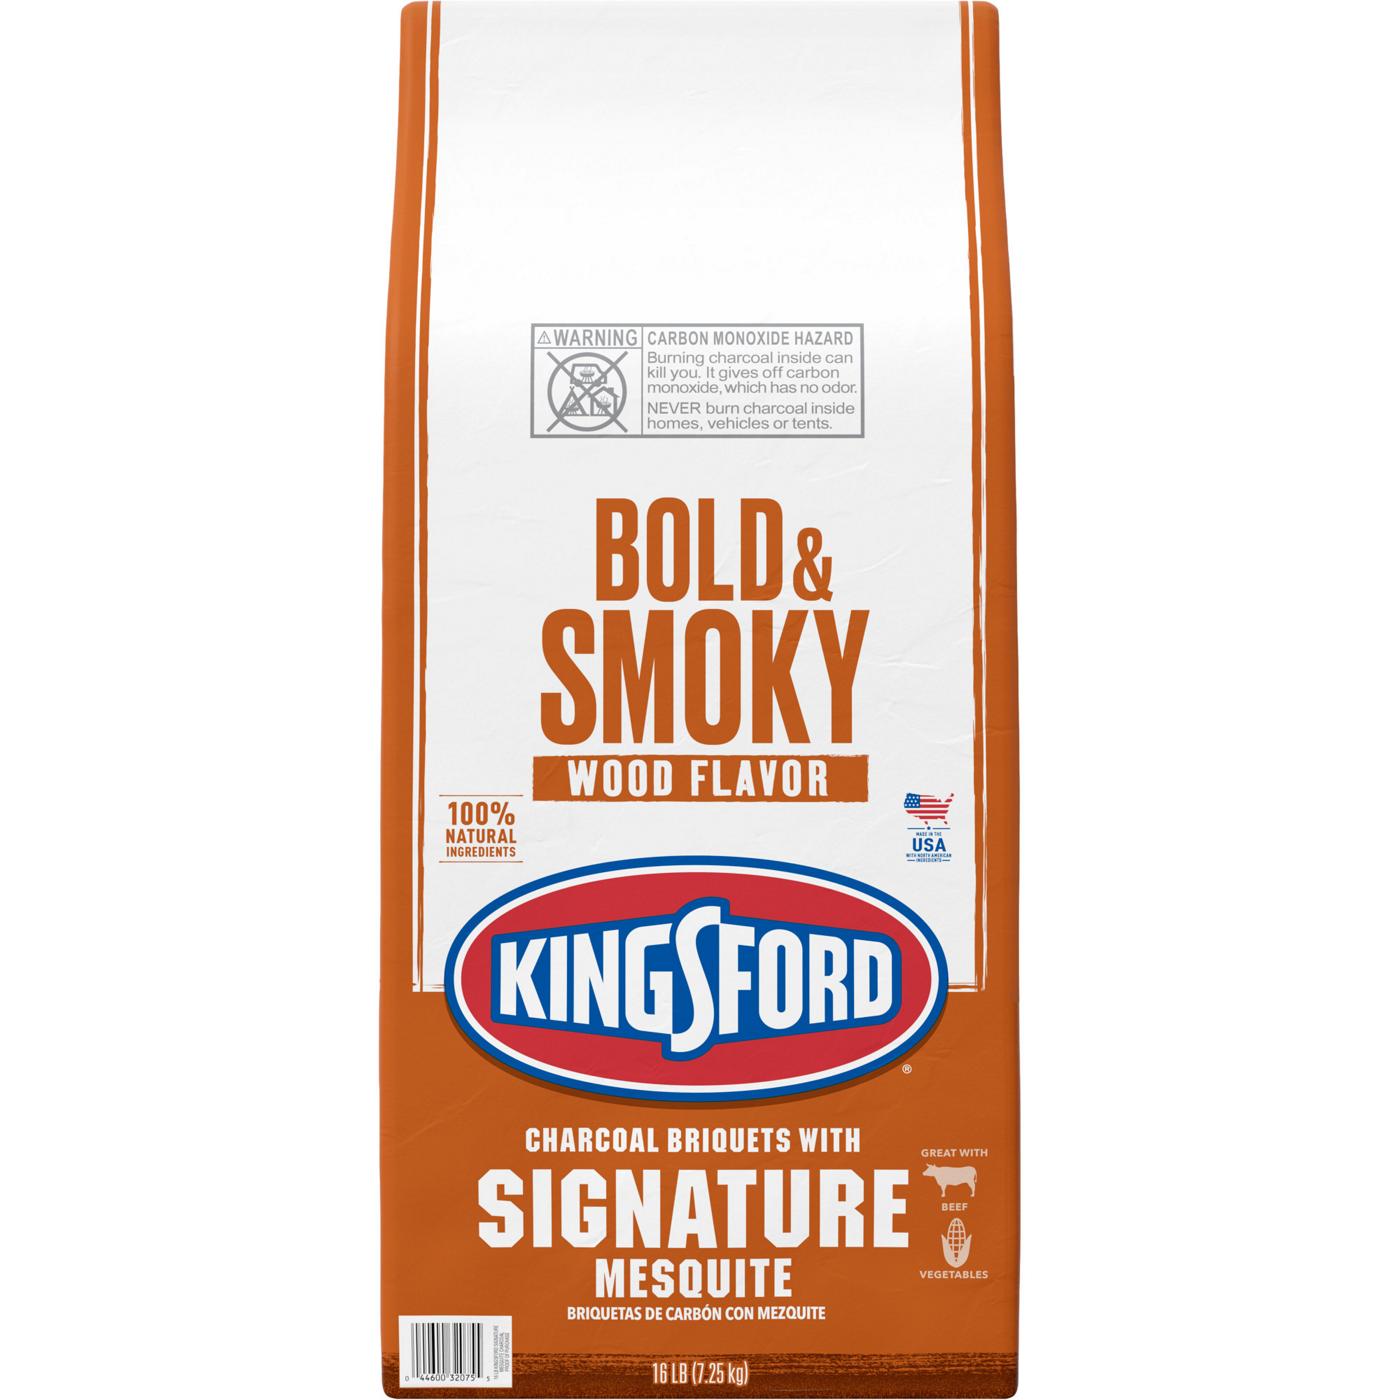 Kingsford Charcoal Briquettes with Signature Mesquite, BBQ Charcoal for Grilling; image 1 of 11